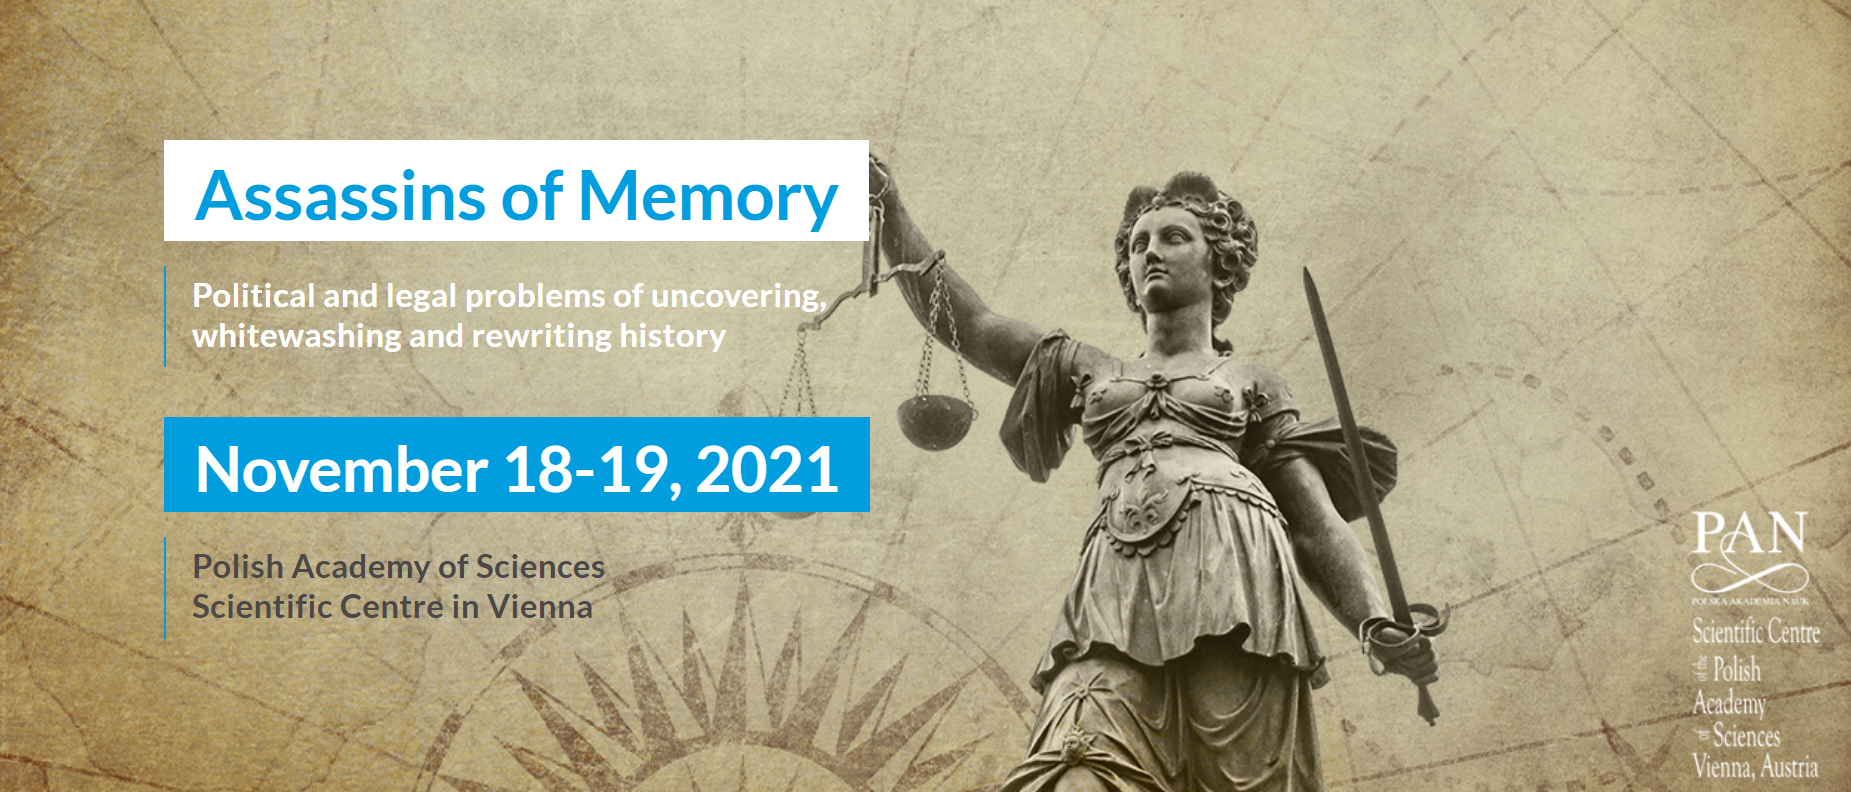 Assassins of Memory. Political and legal problems of uncovering, whitewashing, and rewriting history